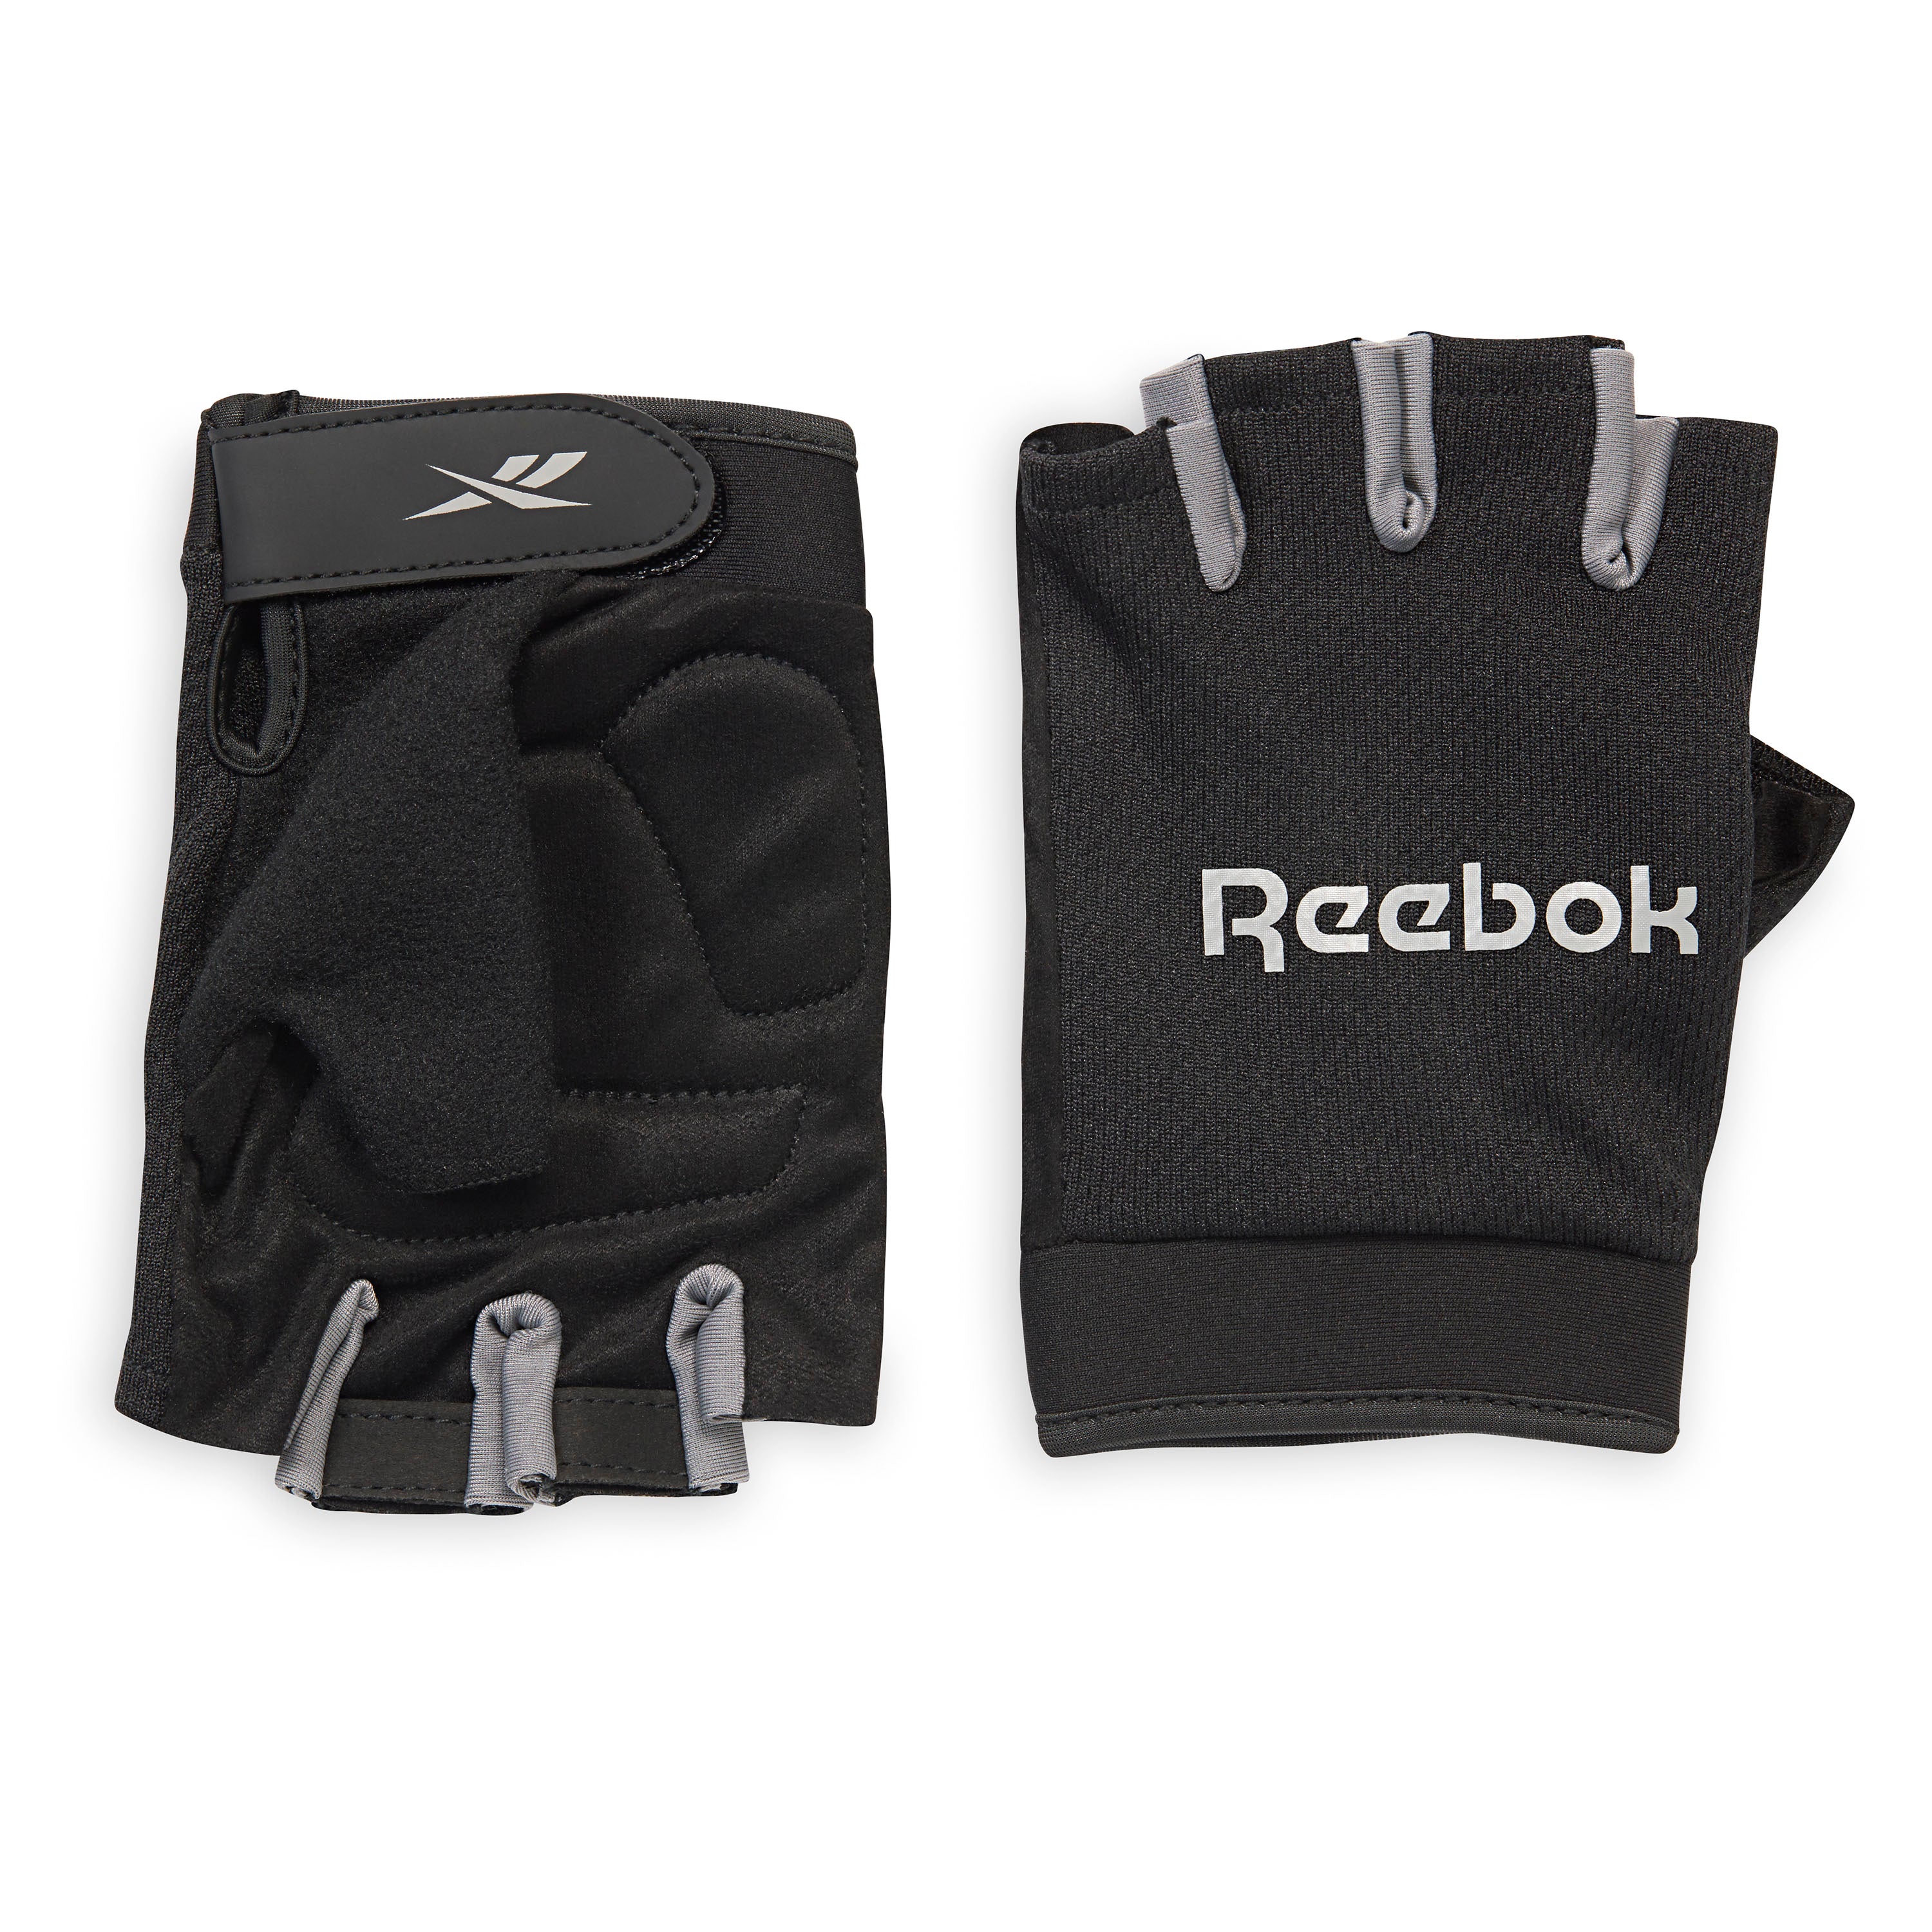 Reebok Classic Fitness Gloves Grey both gloves back and palm